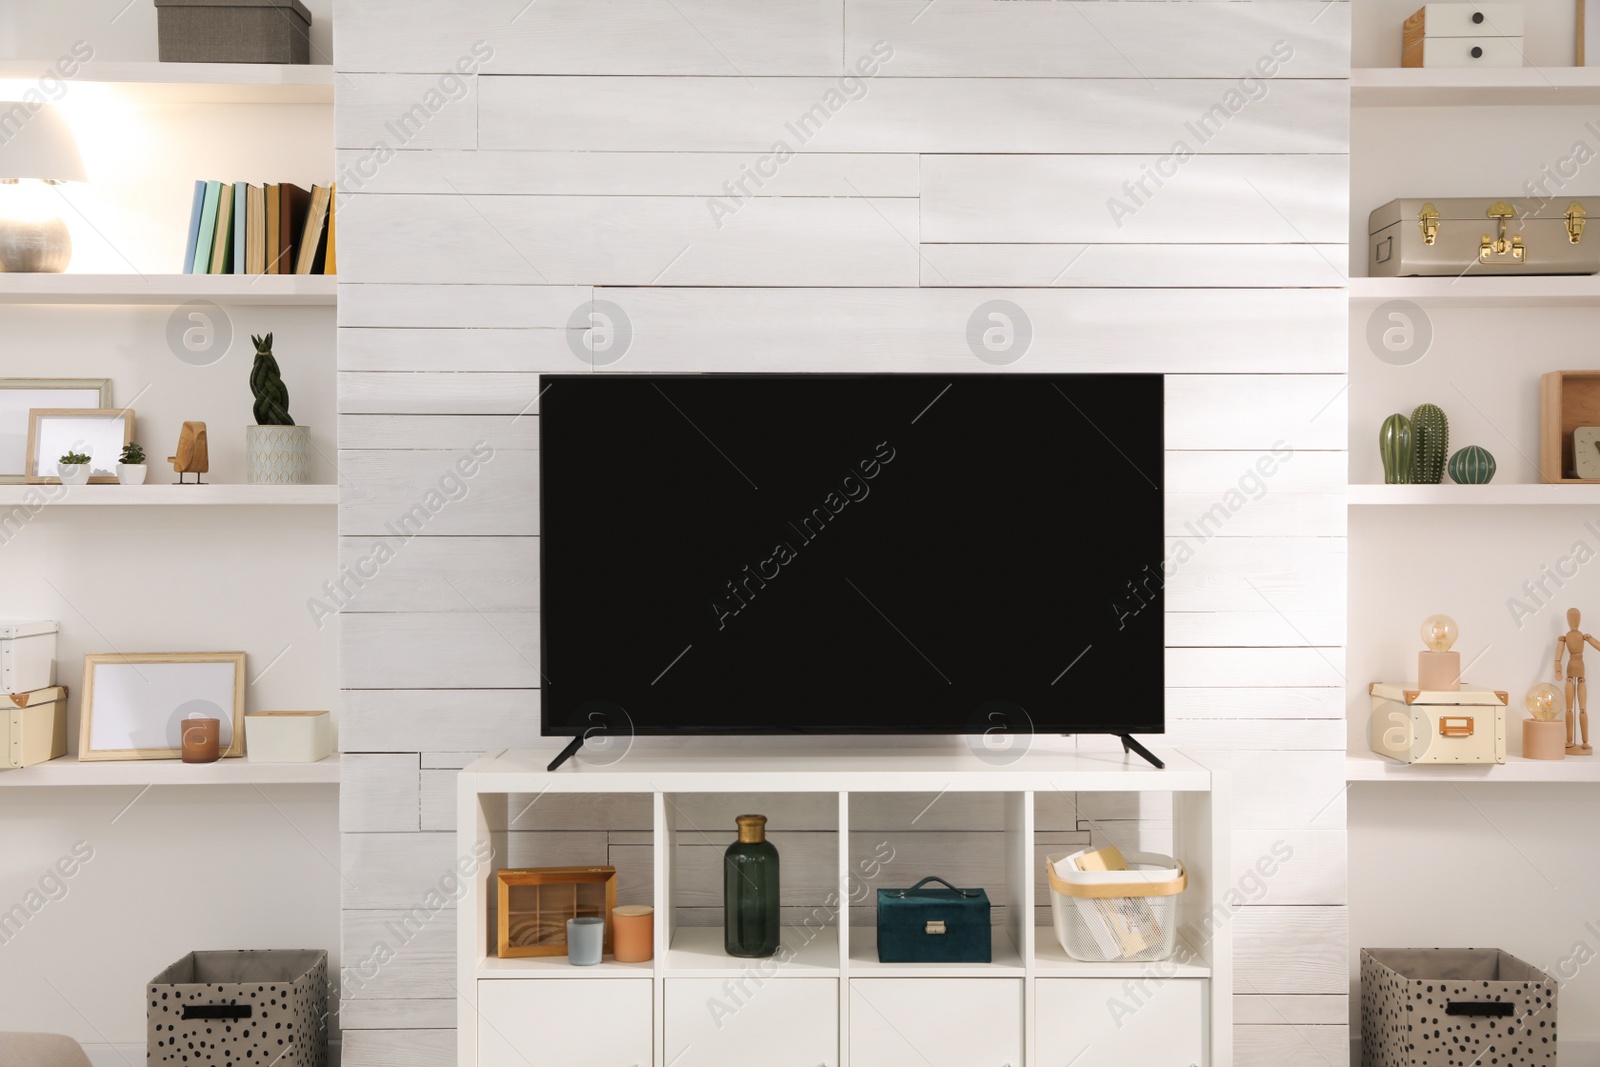 Photo of Cozy room interior with stylish decor and modern TV set